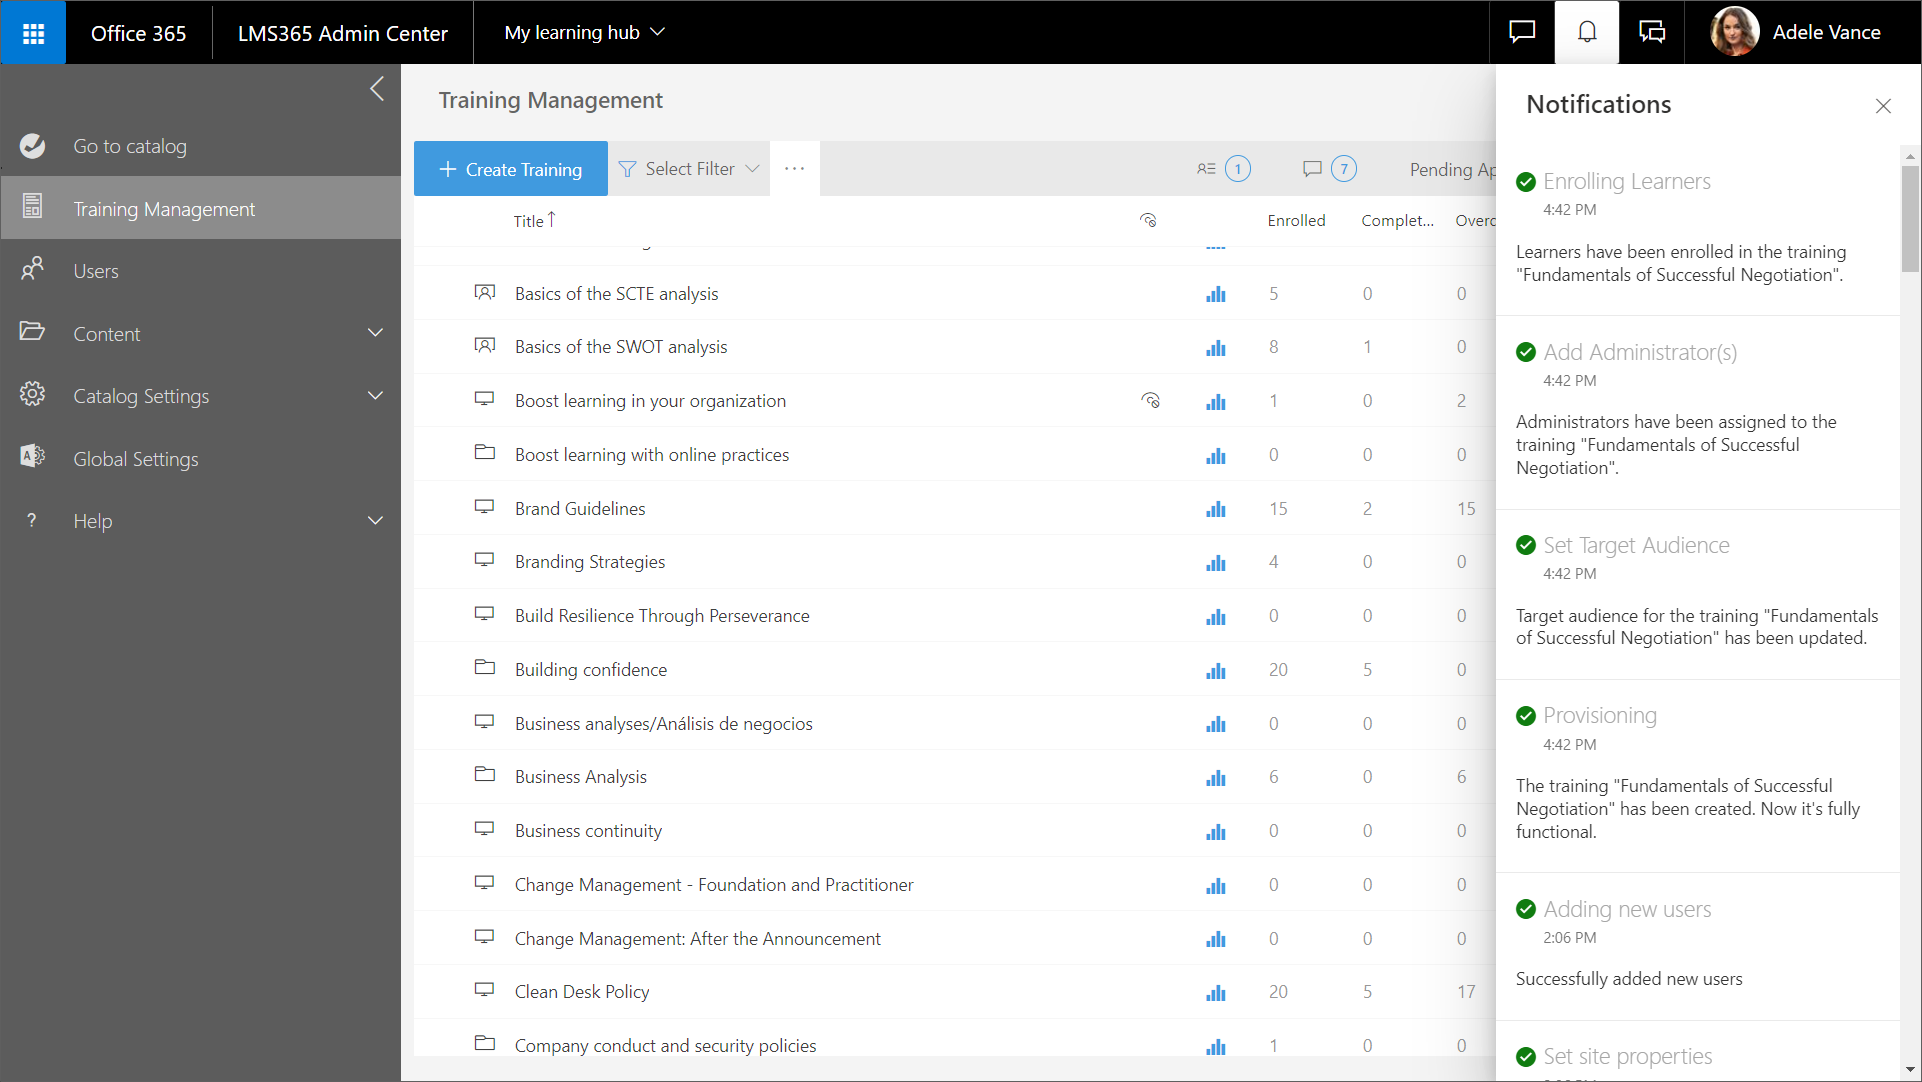 Notifications in the LMS365 Admin Center